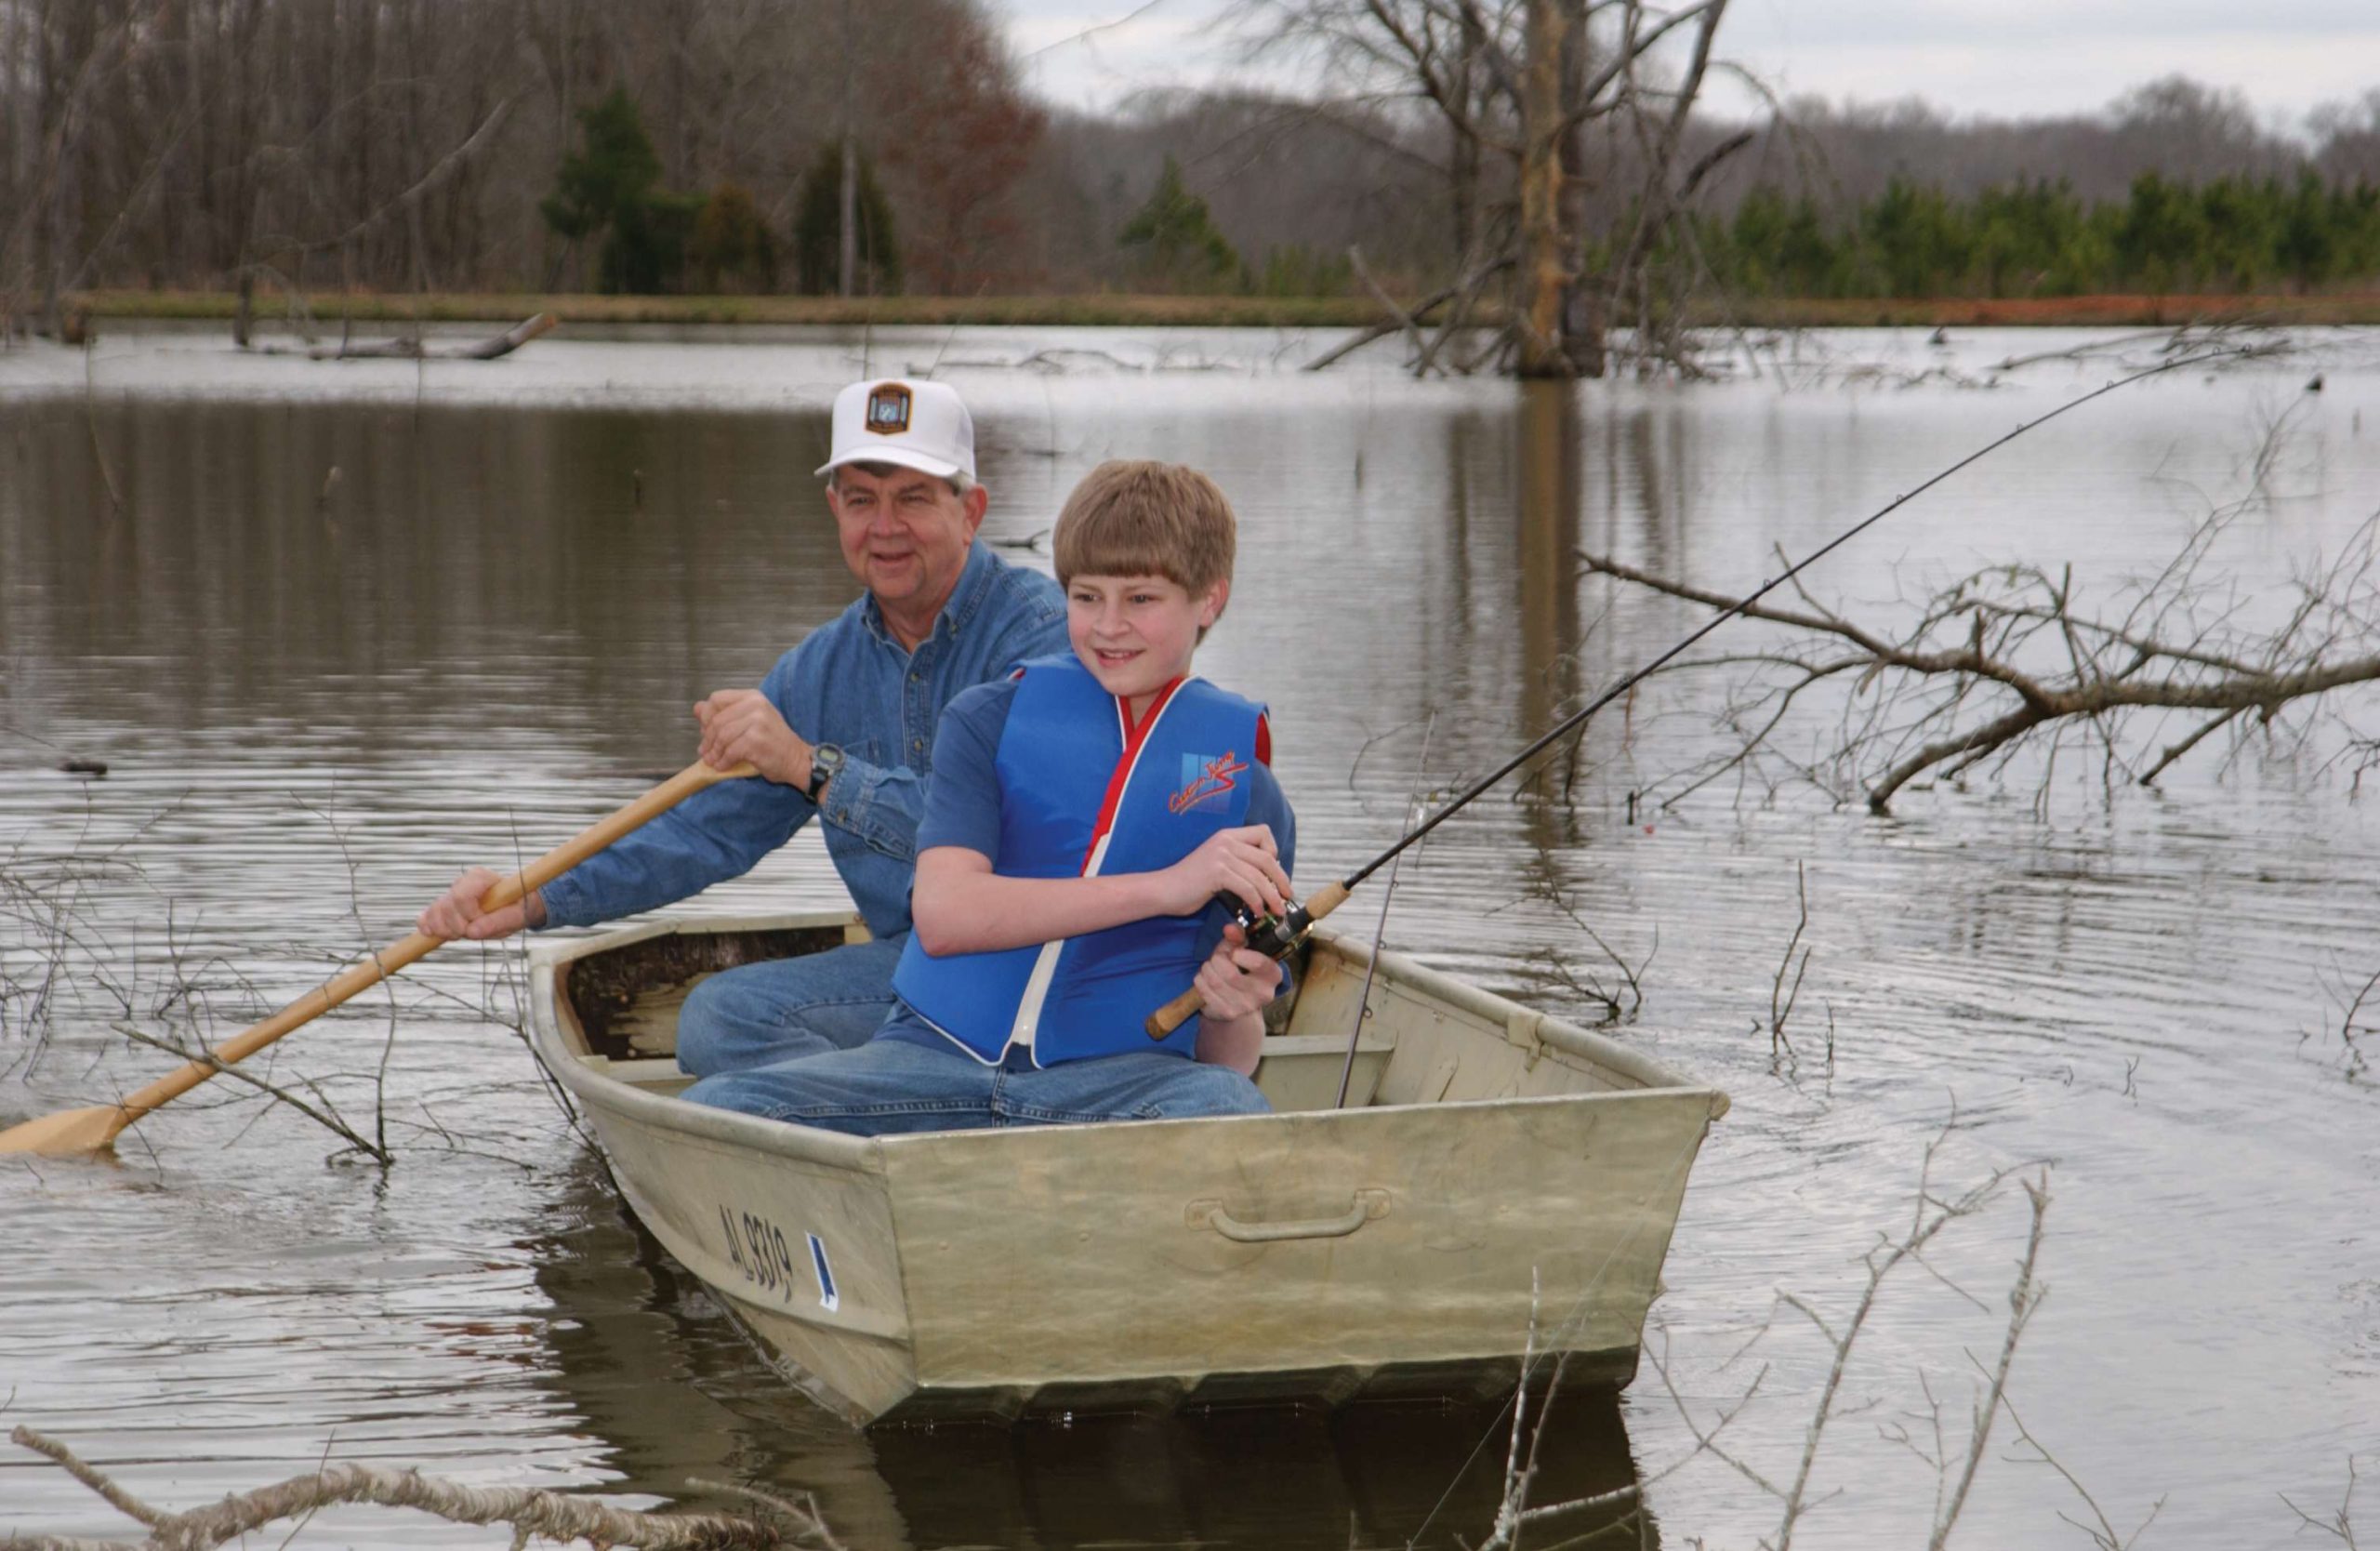 Pictured here with his youngest son, Joseph, the pair were inspiration for the illustration that would appear on the 35th Anniversary cover of Bassmaster.